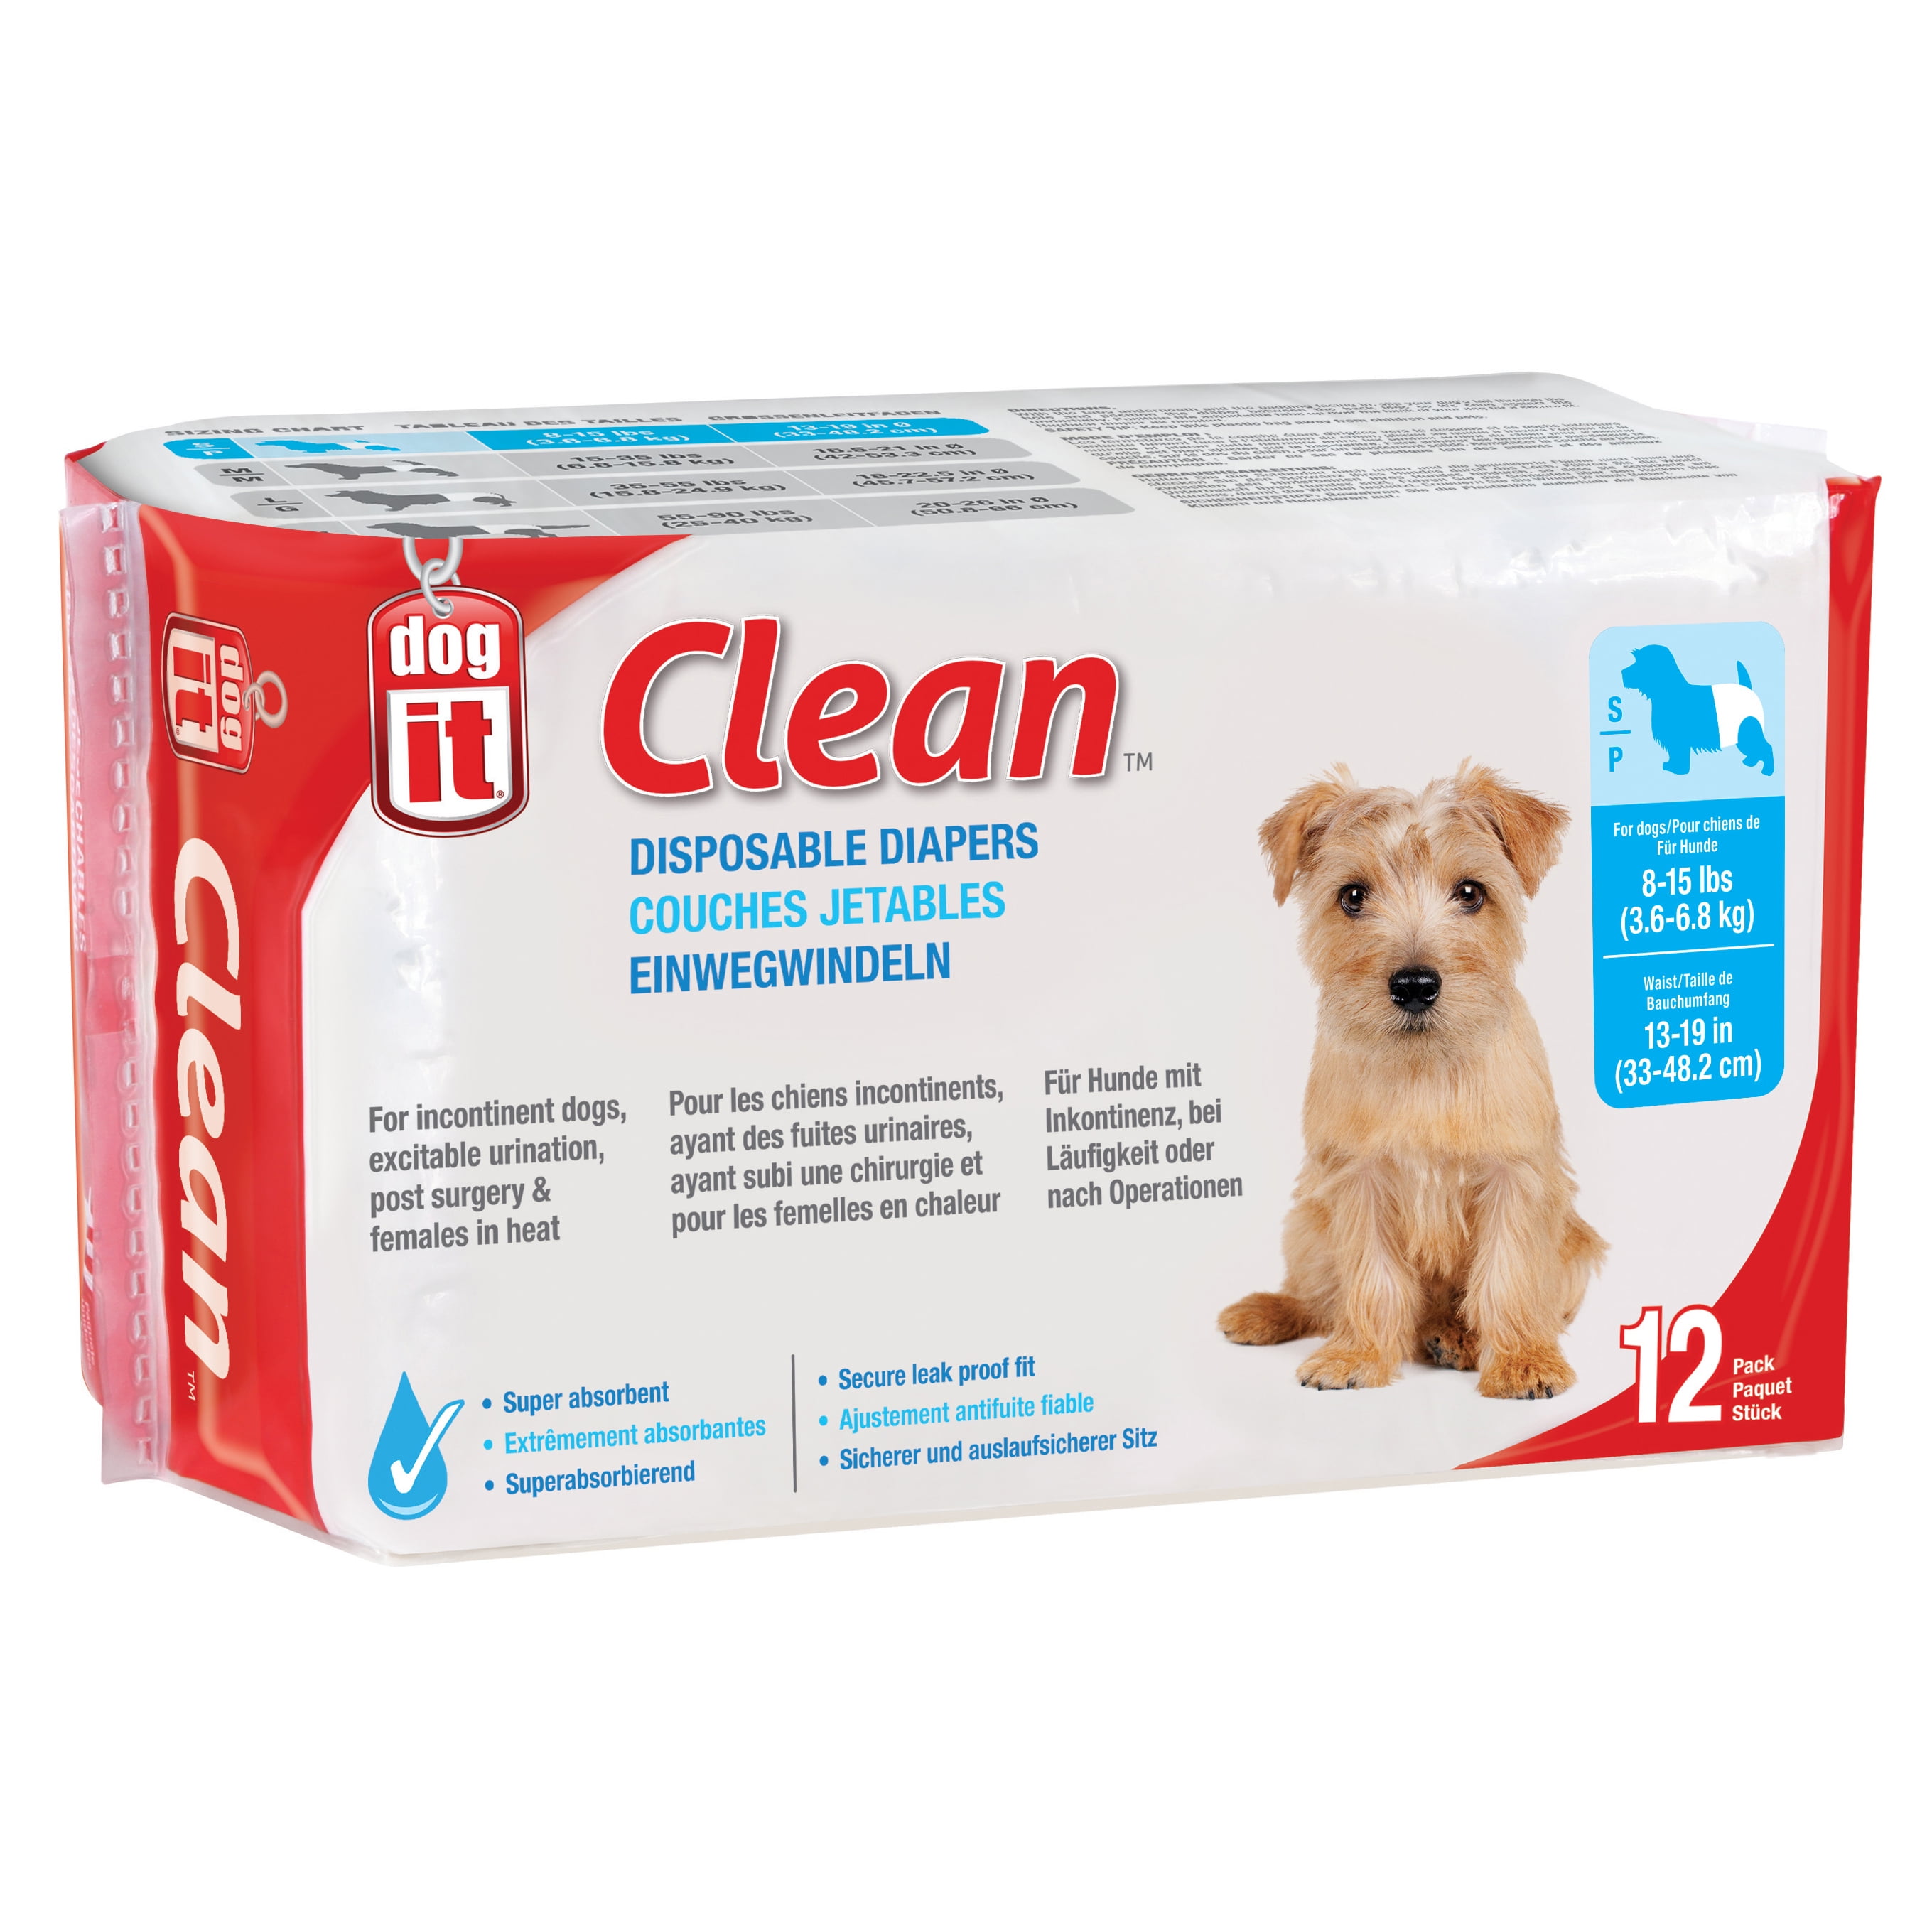 Pet Care Disposable Female Dog DiapersAbsorbent with Leak Proof FitXS OUT 